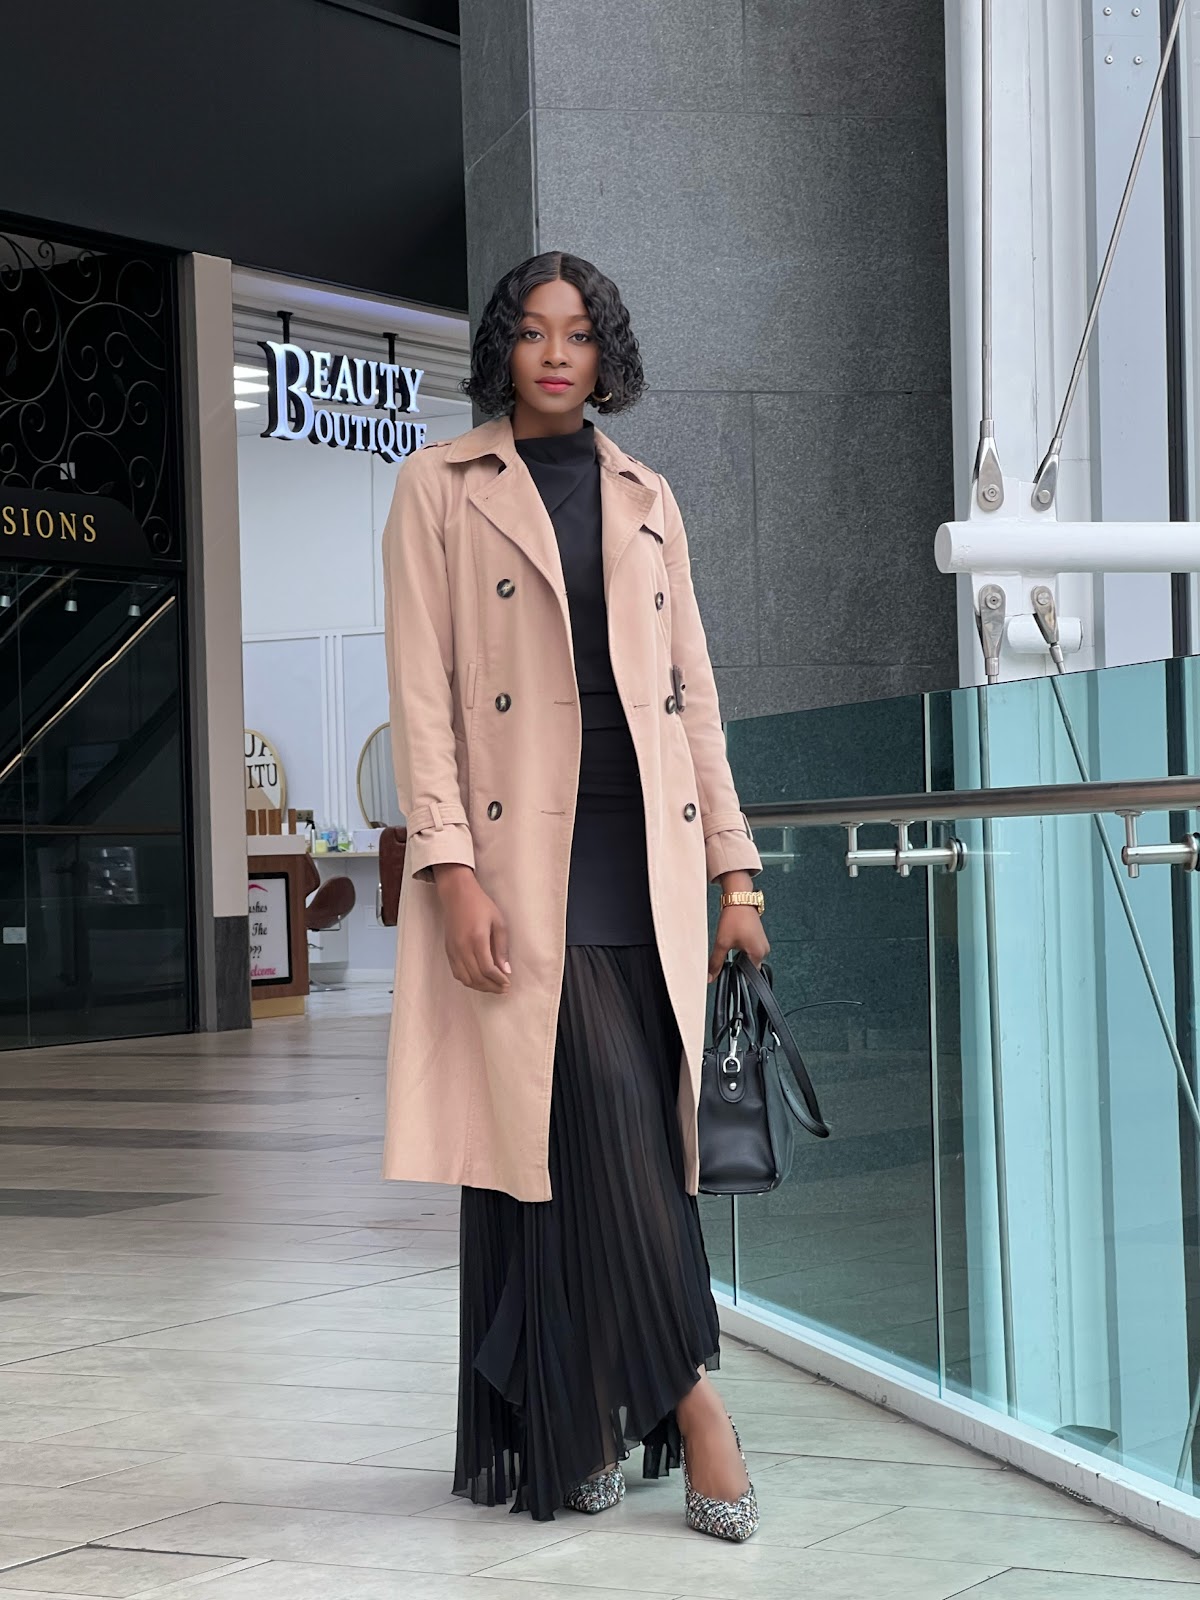 4 different ways to style a trench coat for fall